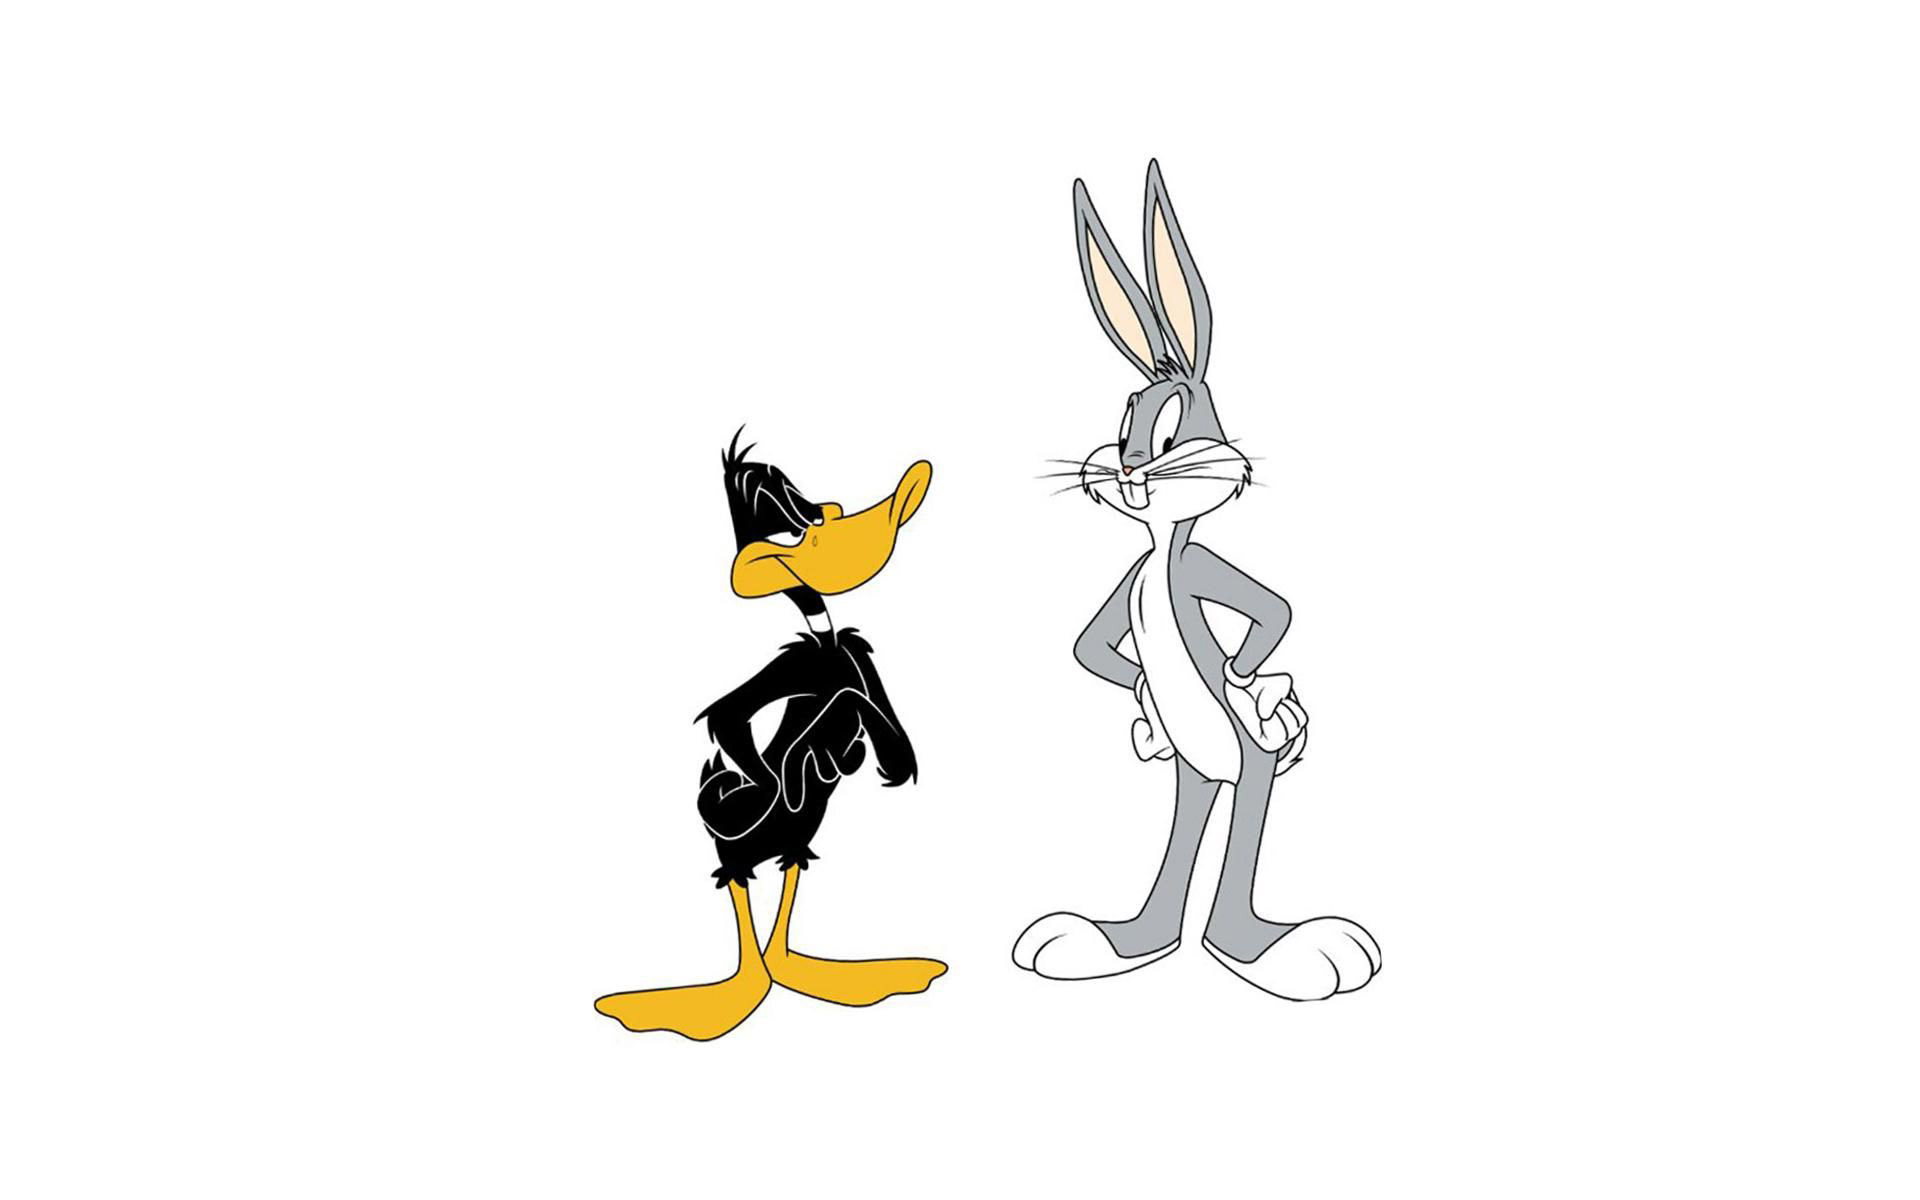 Bugs Bunny And Daffy Duck Wallpaper